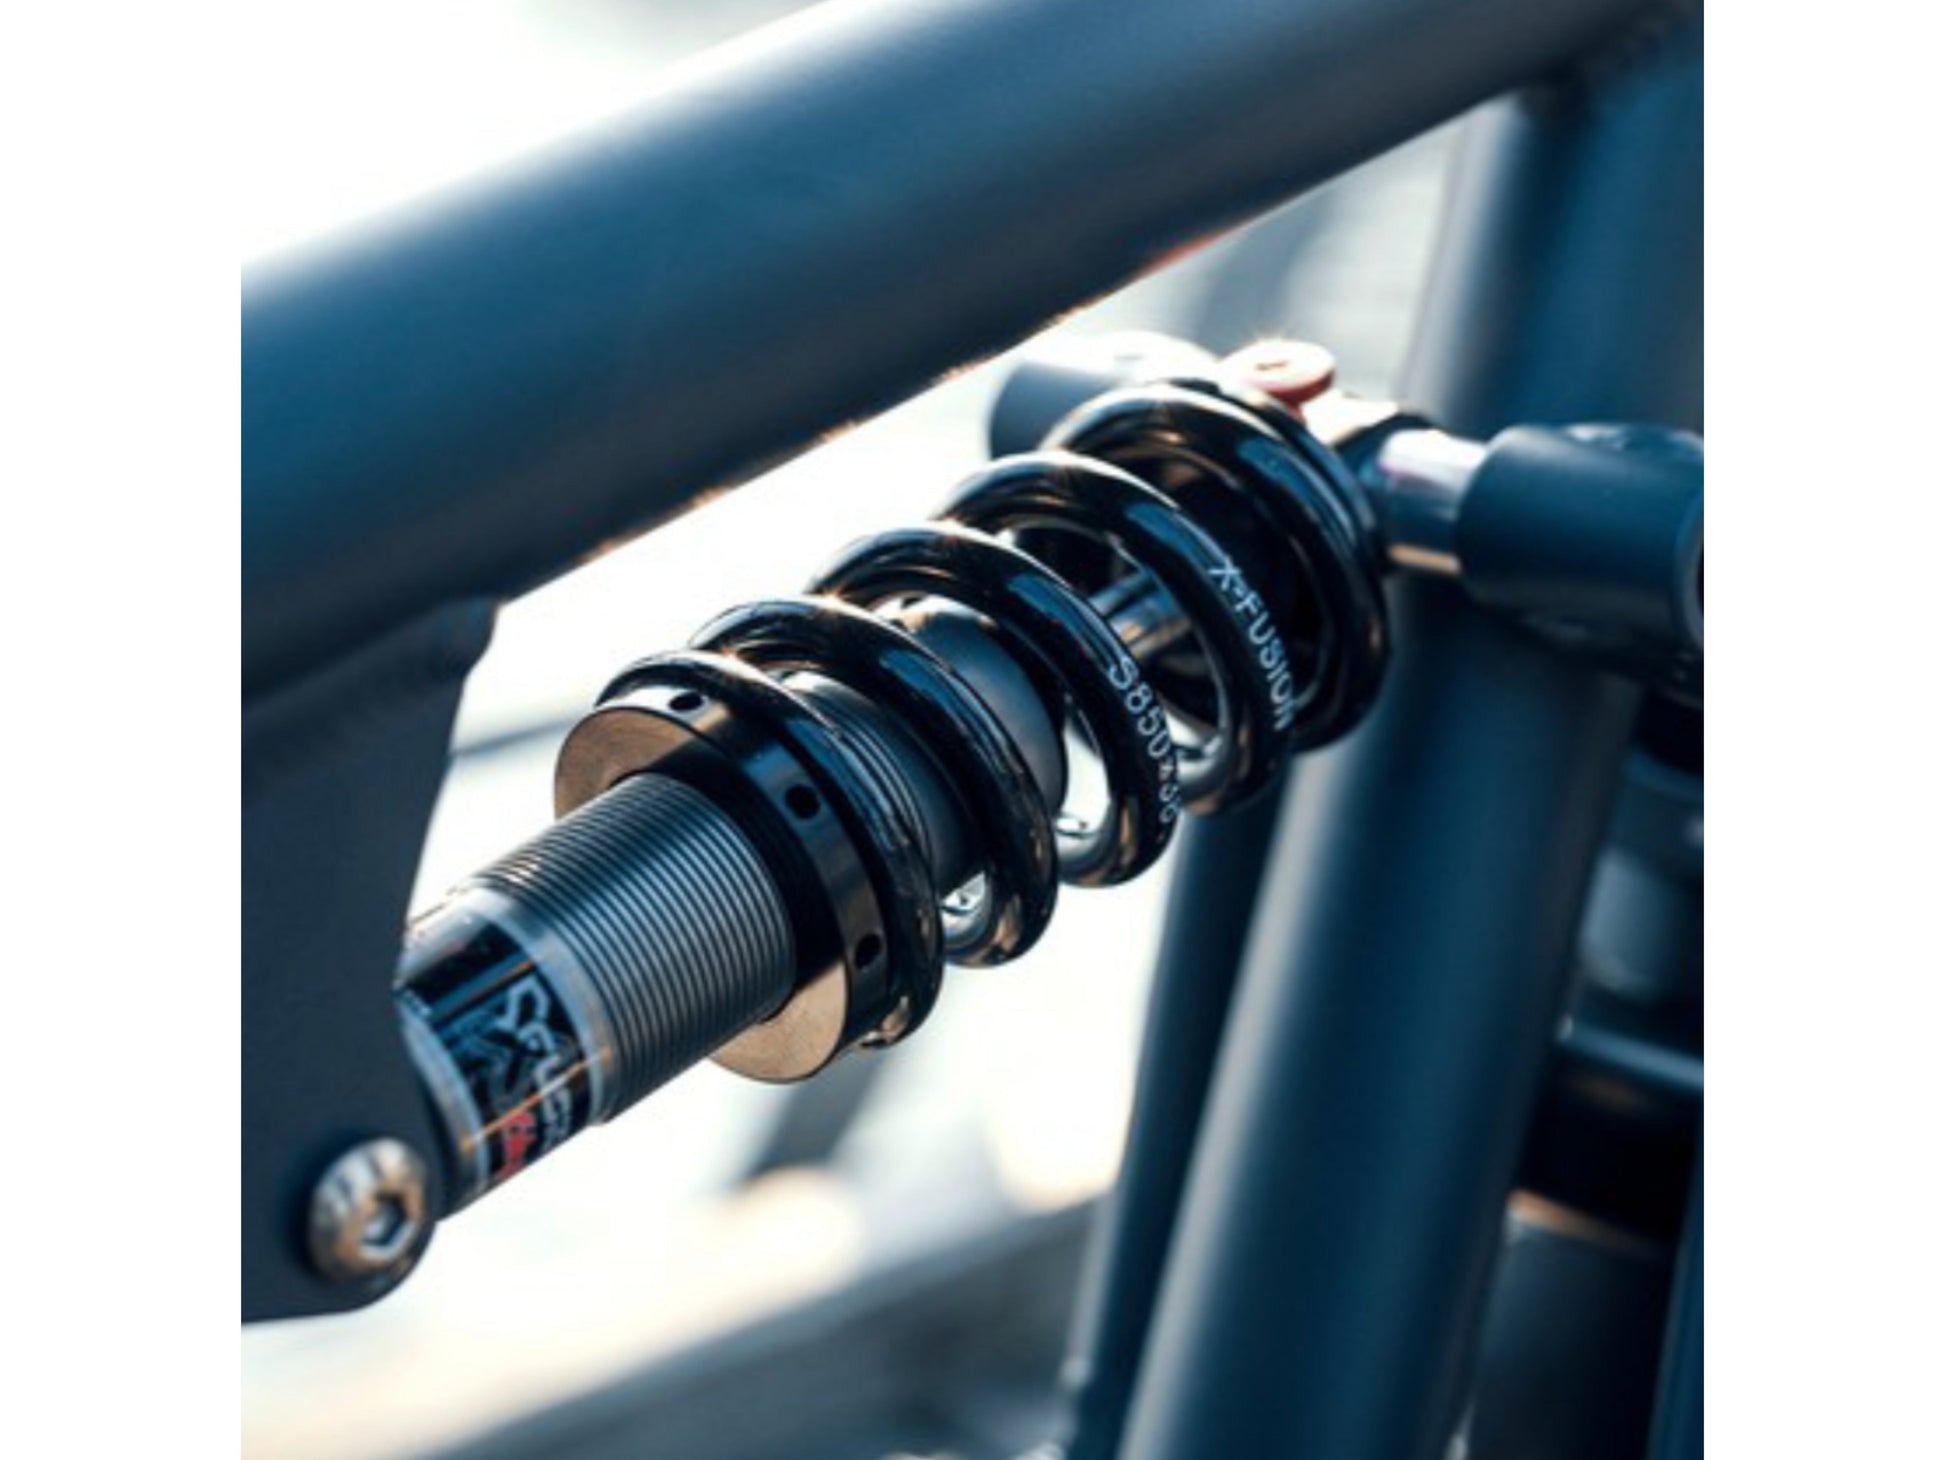 Riese and Muller Load 75 Touring eMTB full suspension close up X Fusion Glyde rear shock